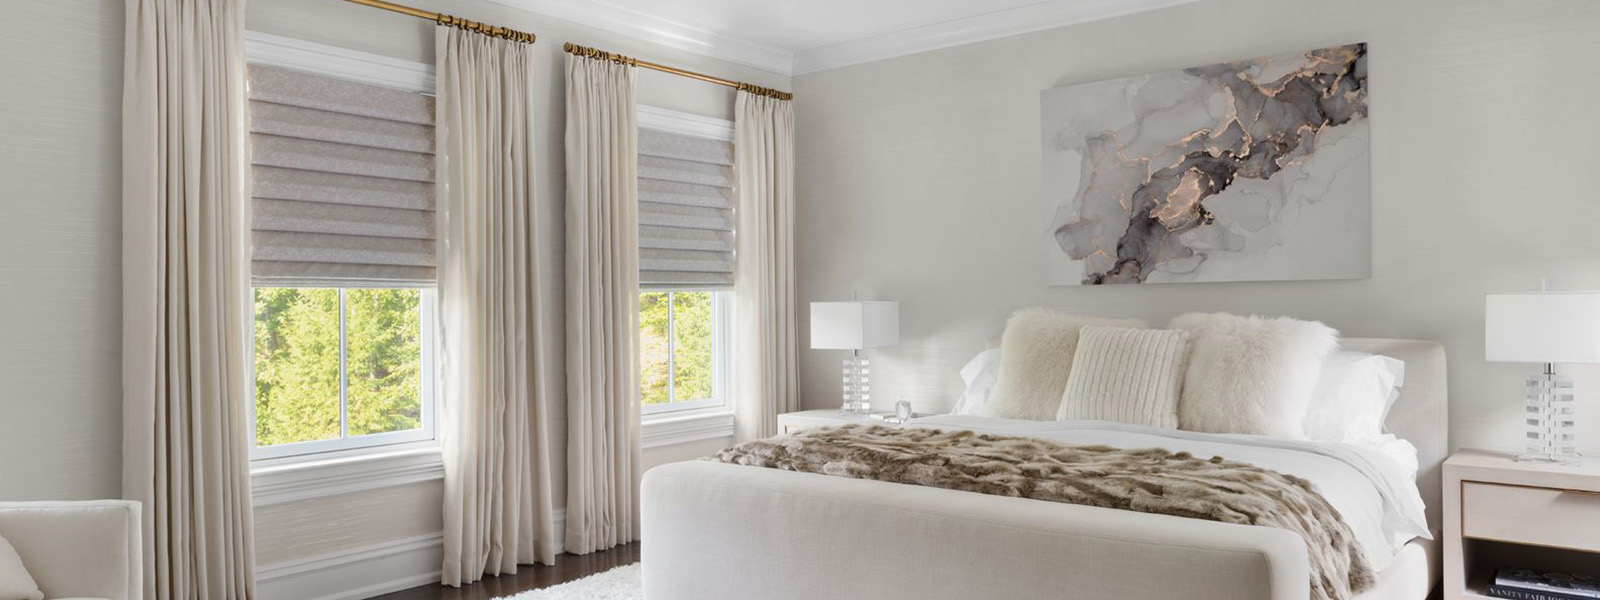 Drapes paired with roman shades on a double window in a modern bedroom.